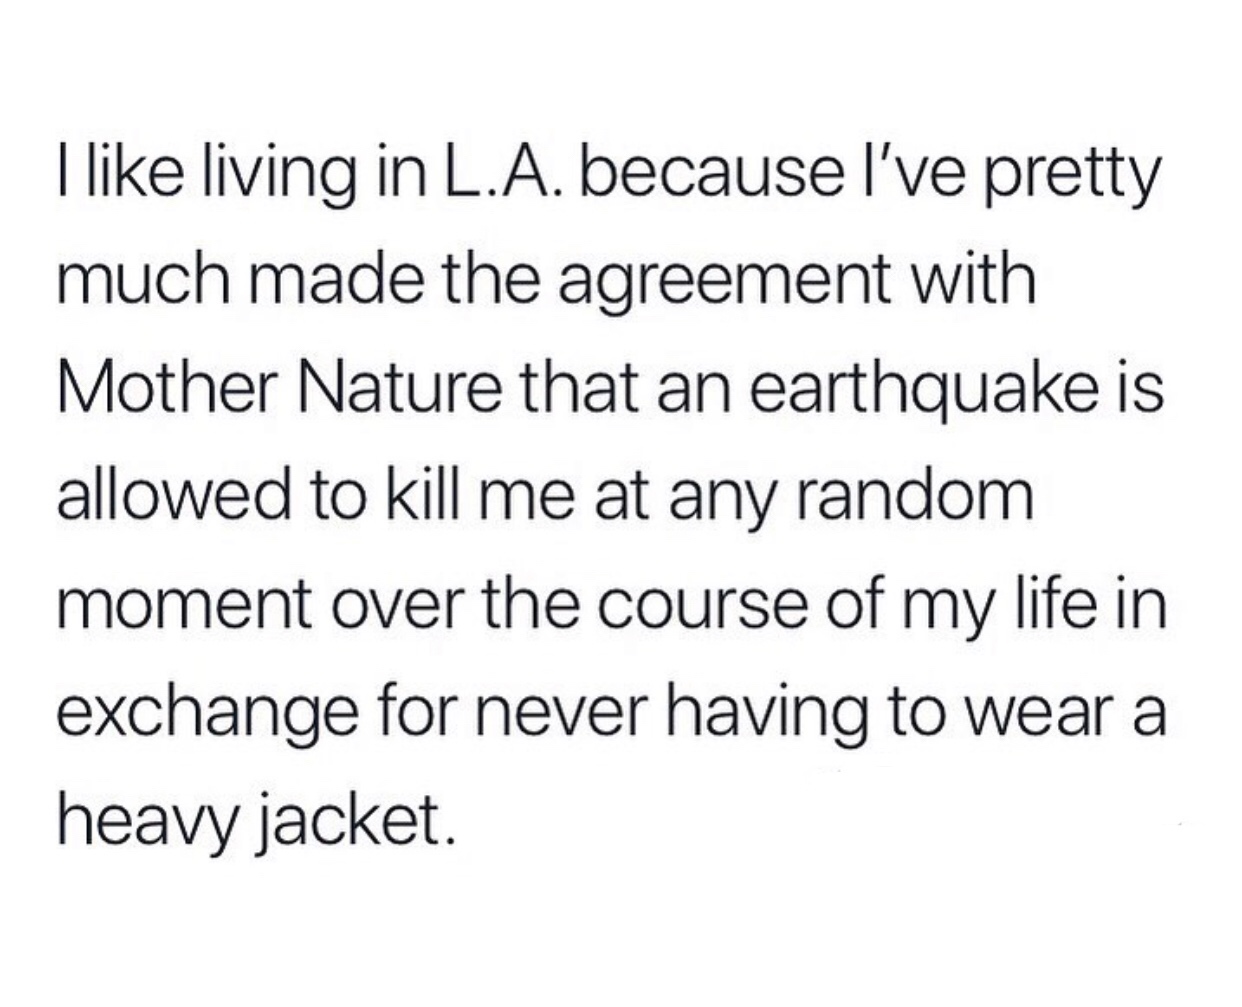 dick bug penis beetle - I living in L.A. because I've pretty much made the agreement with Mother Nature that an earthquake is allowed to kill me at any random moment over the course of my life in exchange for never having to wear a heavy jacket